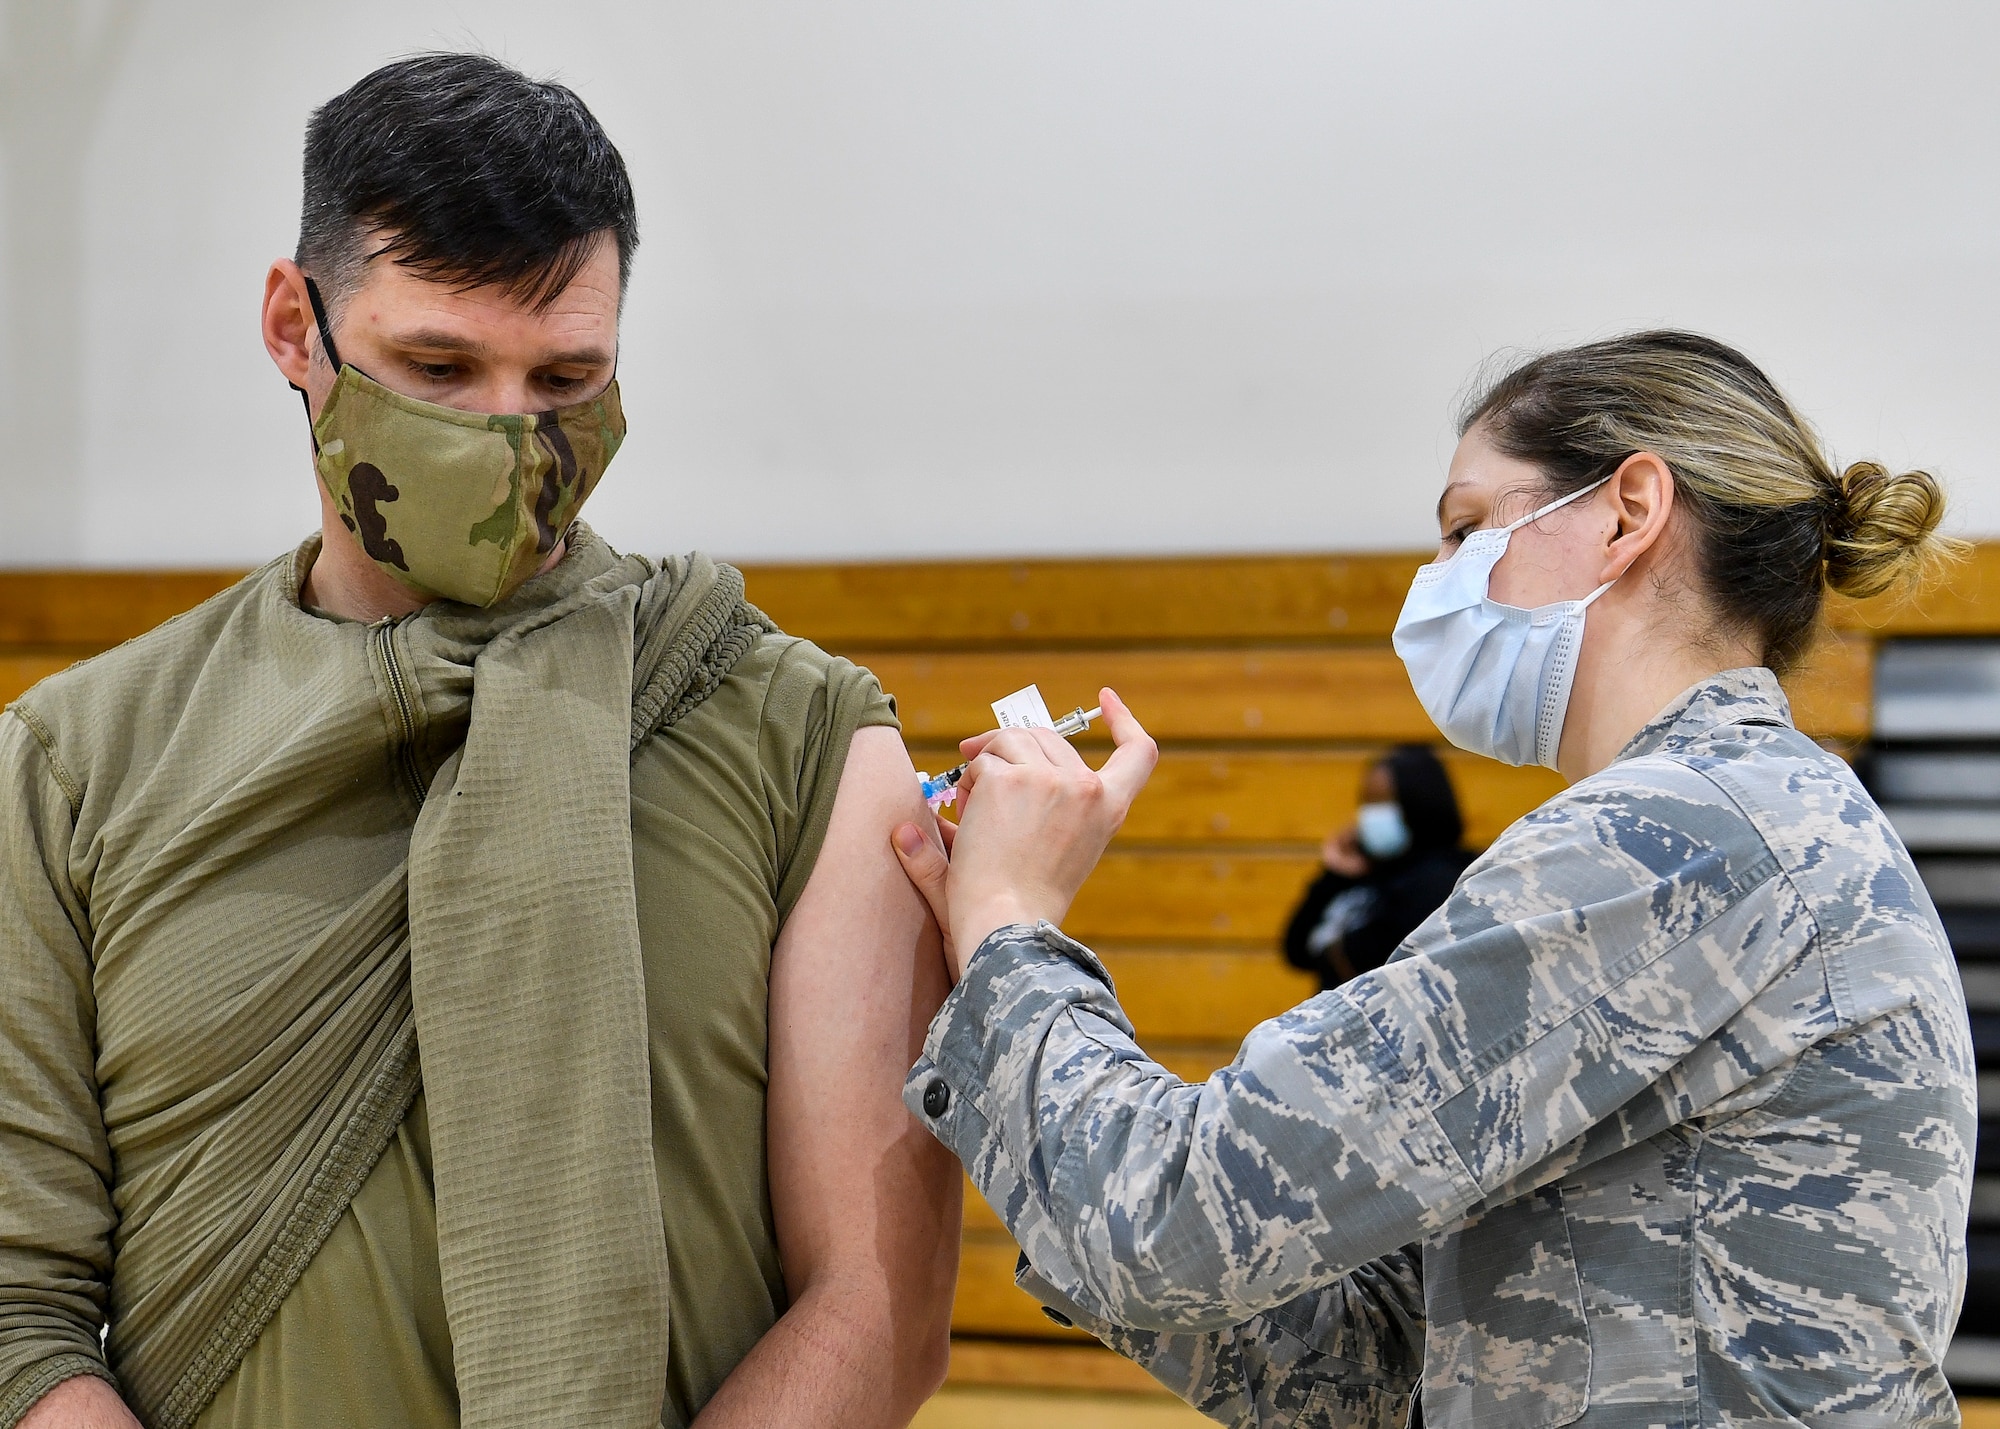 Chief Master Sgt. Spence Johnson, 87th Security Forces Squadron superintendent, receives the COVID-19 vaccine at the Point of Dispensing on Joint Base McGuire-Dix-Lakehurst, New Jersey, Dec. 31, 2020. In accordance with the Department of Defense vaccination plan, the 87th Medical Group prioritized medical care providers, emergency services, safety personnel, and deploying forces to receive the vaccine before other members of the DoD population. (U.S. Air Force photo by Staff Sgt. Jake Carter)